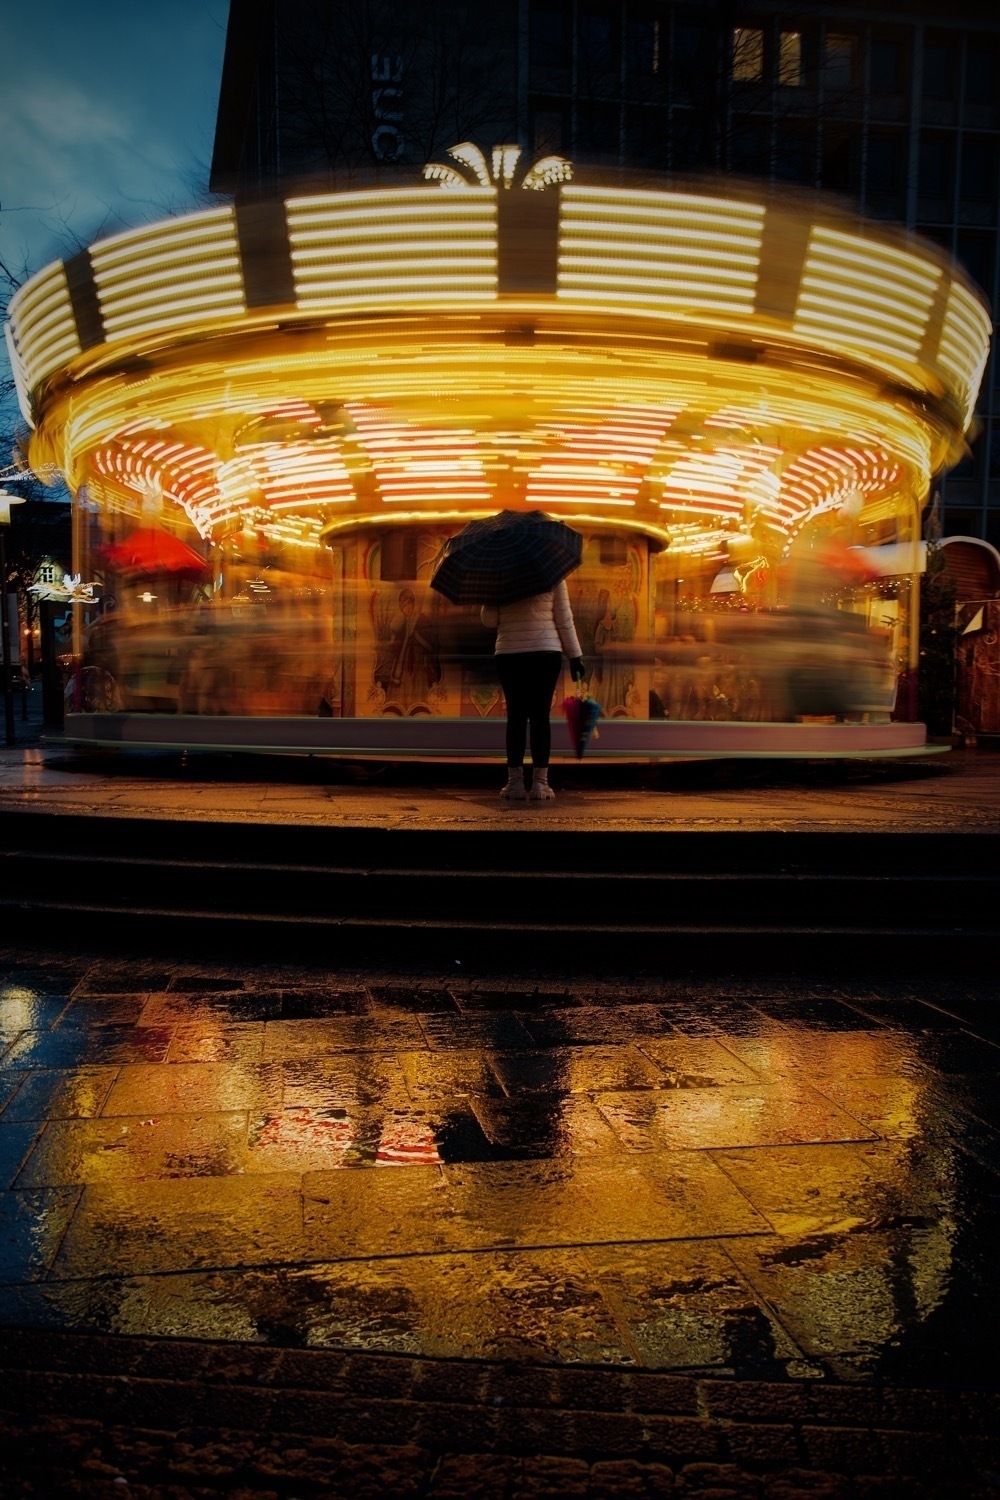 A carousel moving with motion blur. A reflection of the carousel visible on the wet stones in front of it. A person with an umbrella standing before the carousel.